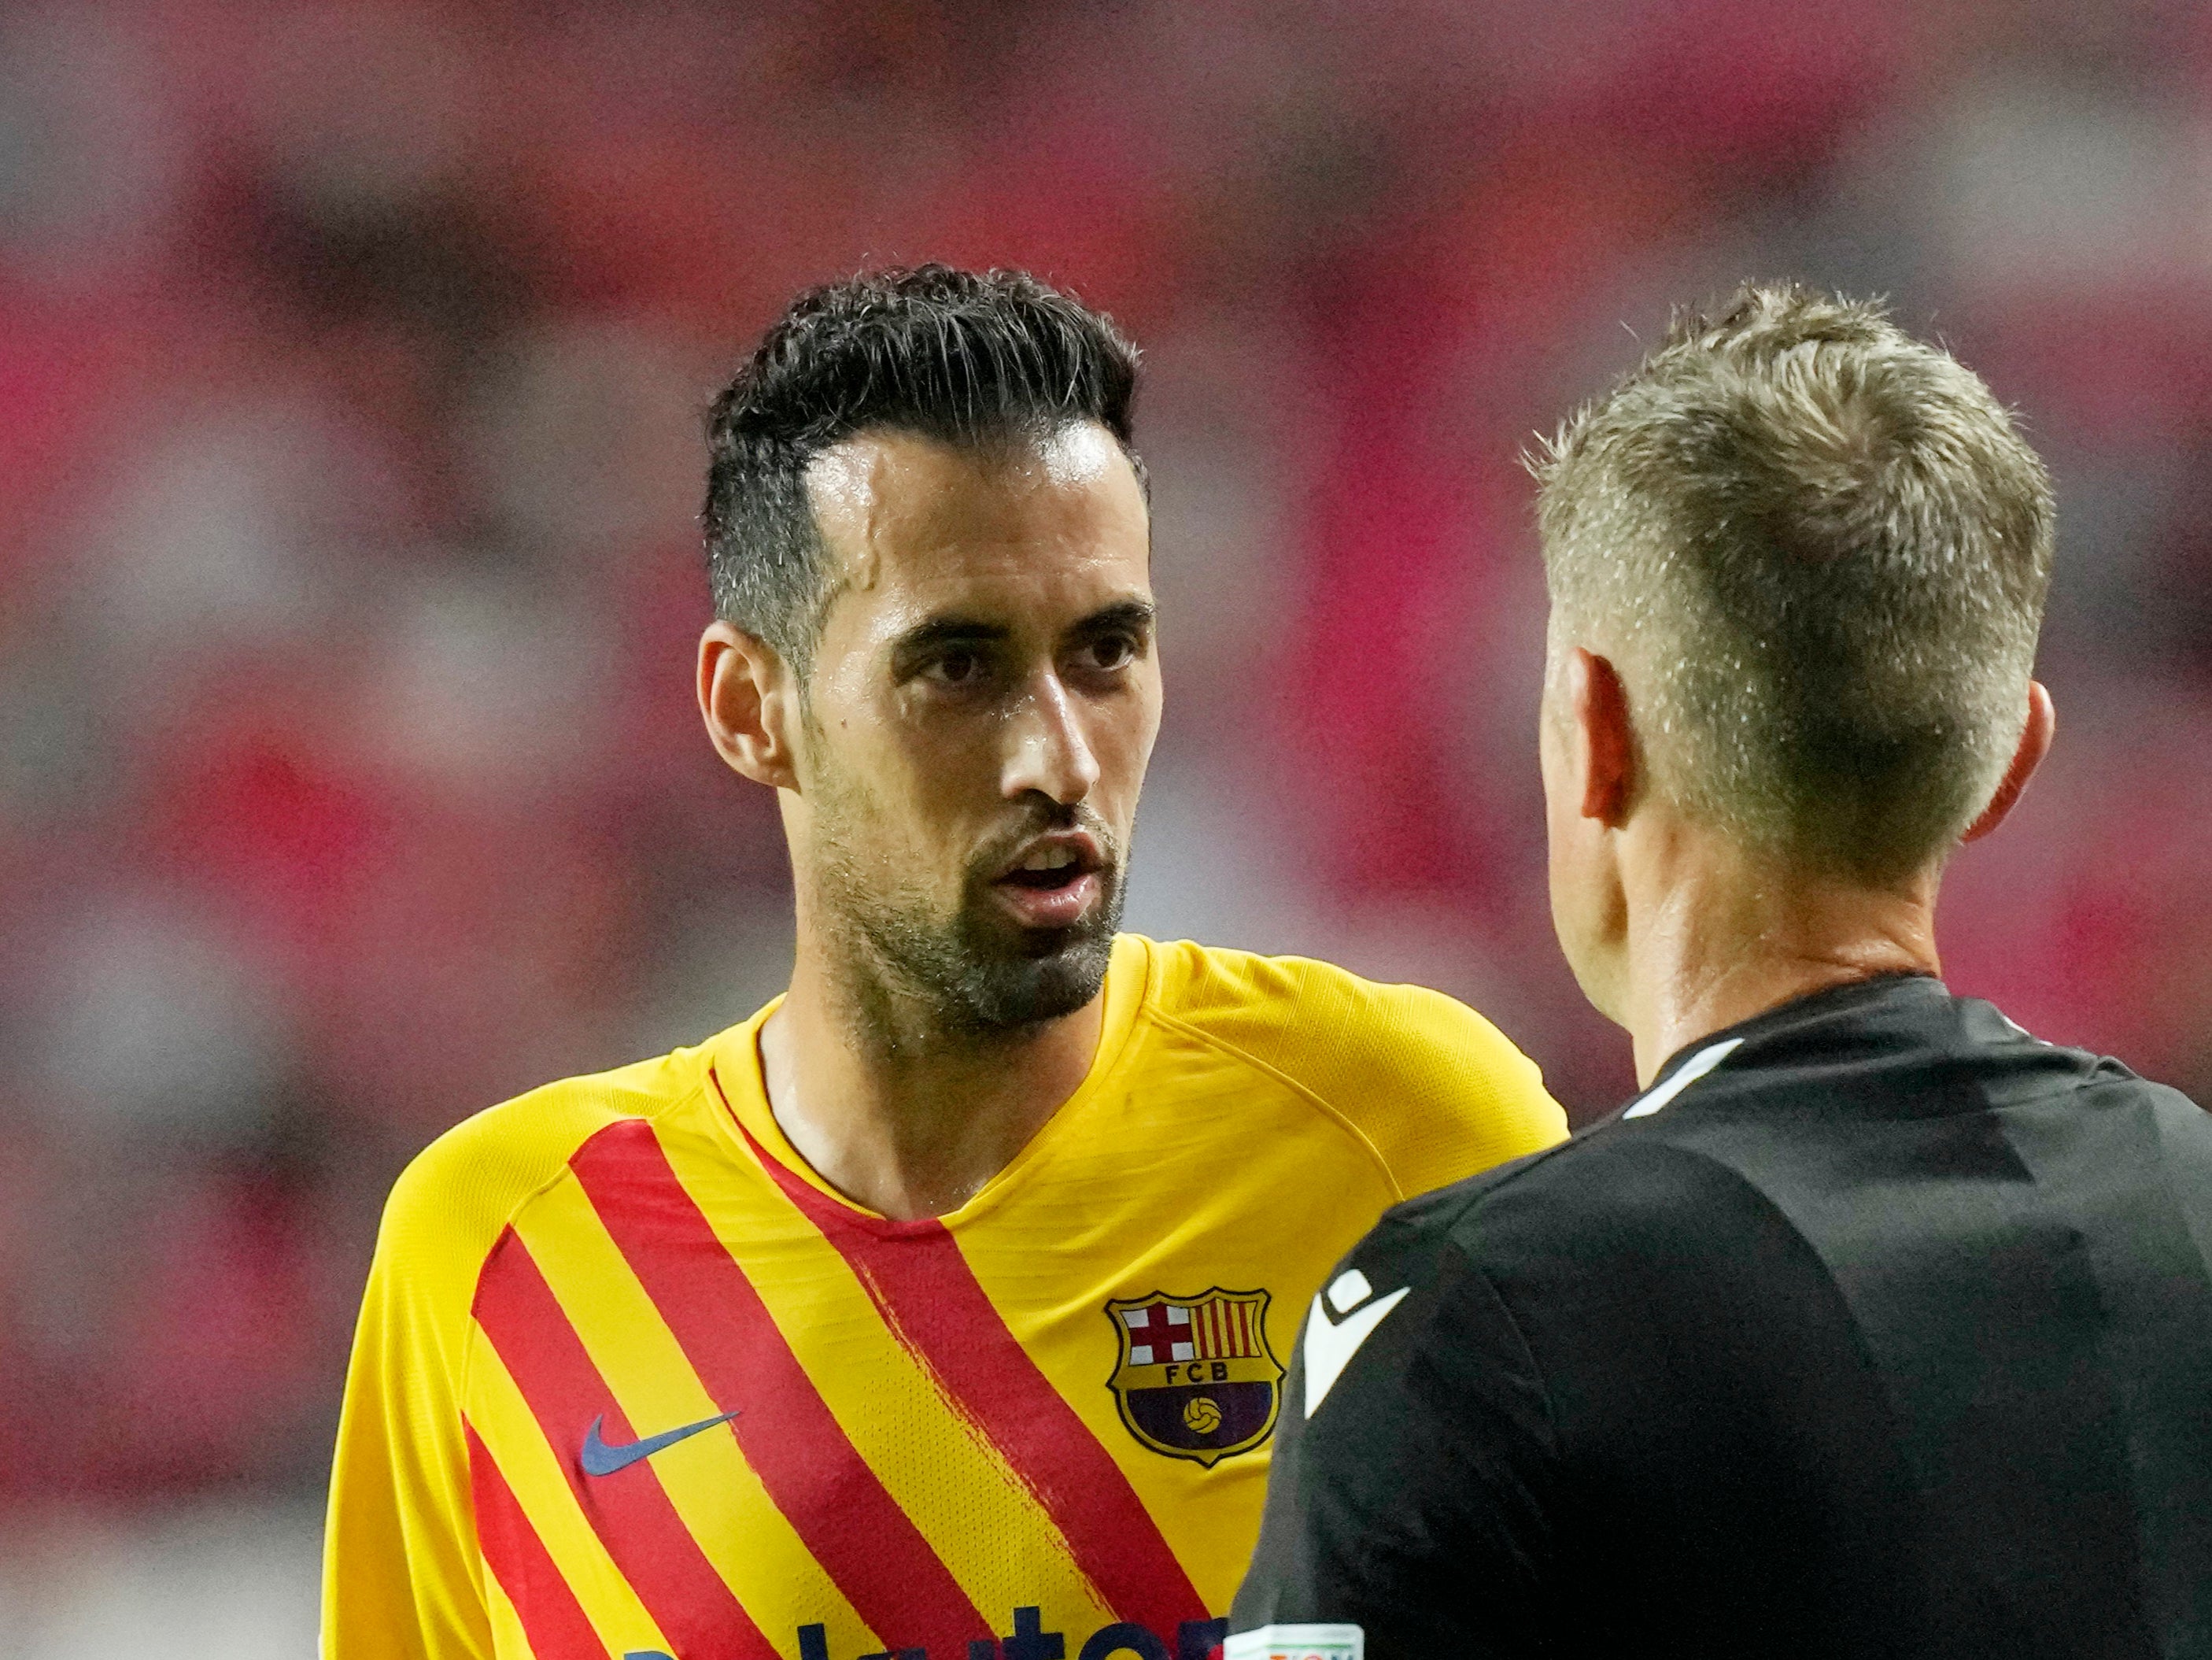 Sergio Busquets speaks with the referee